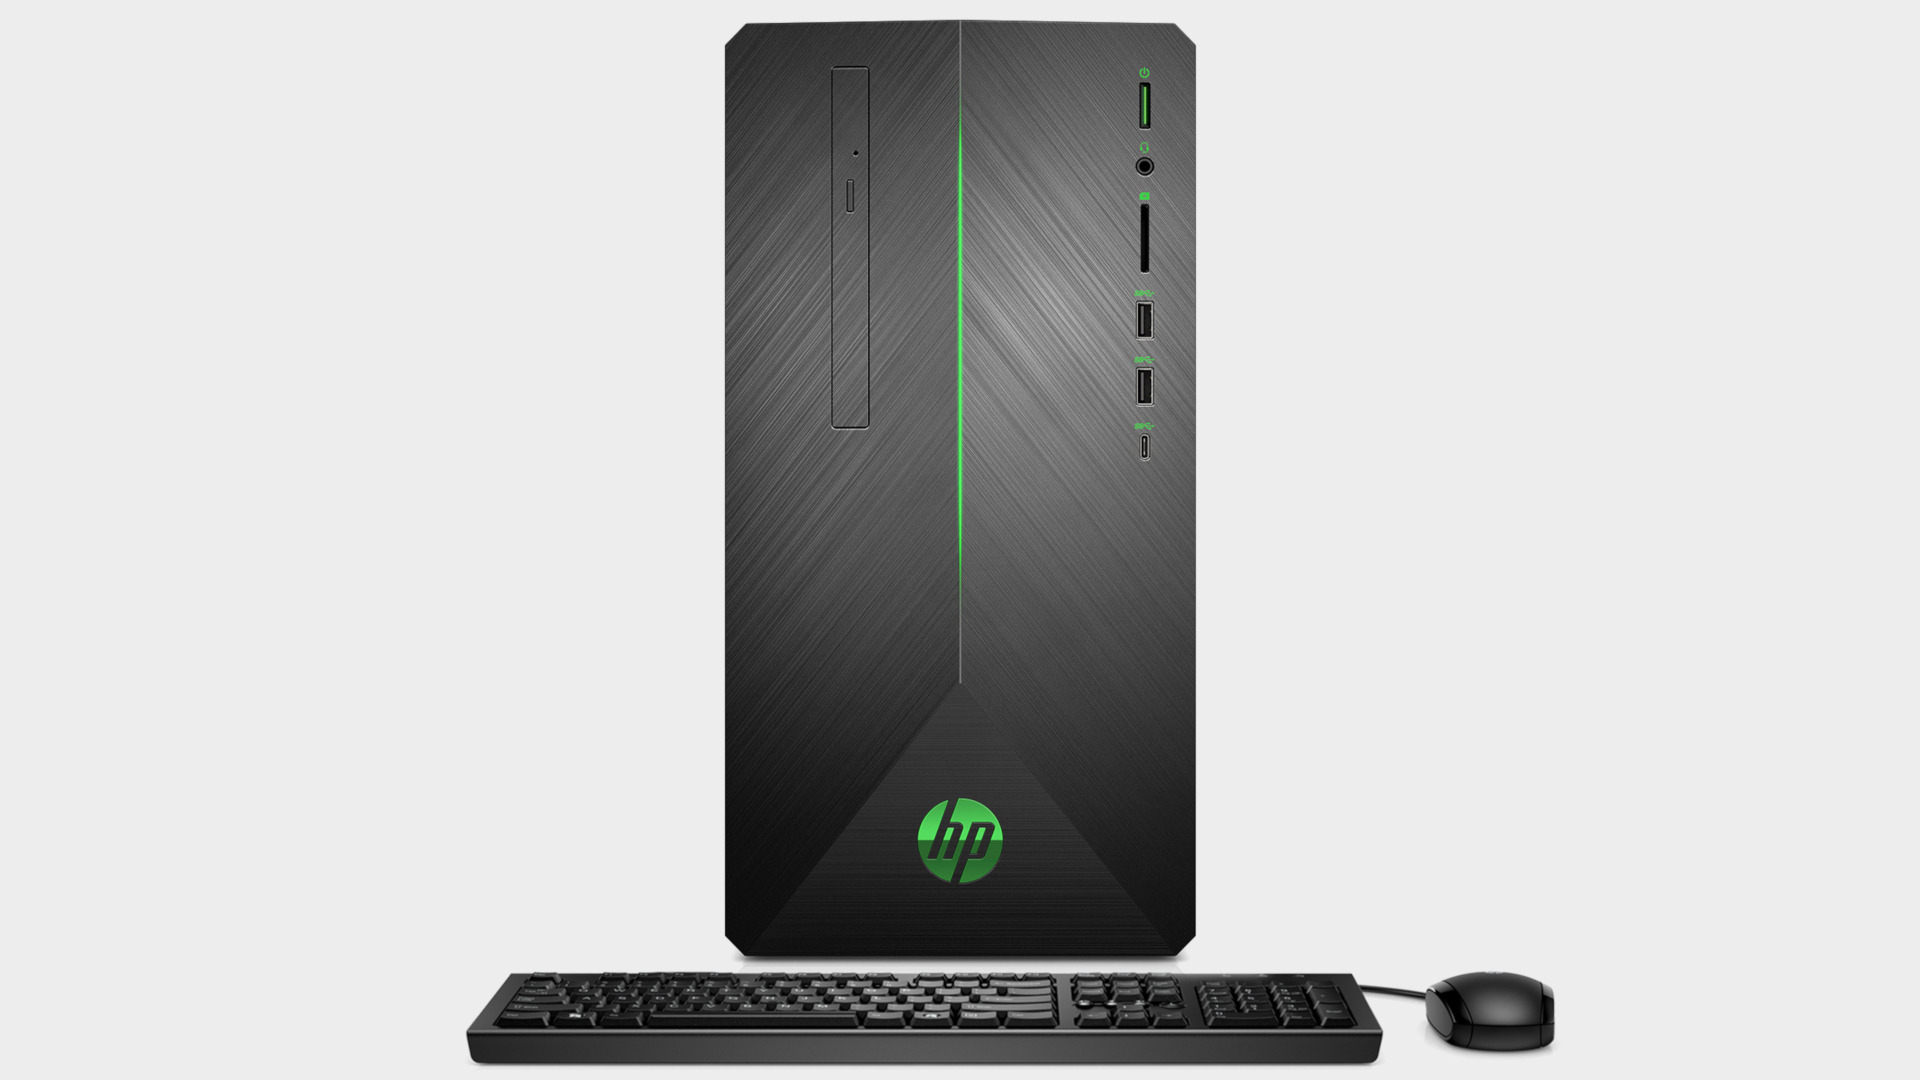 This HP Pavilion for $579 might be the cheapest PC with a GTX 1660 